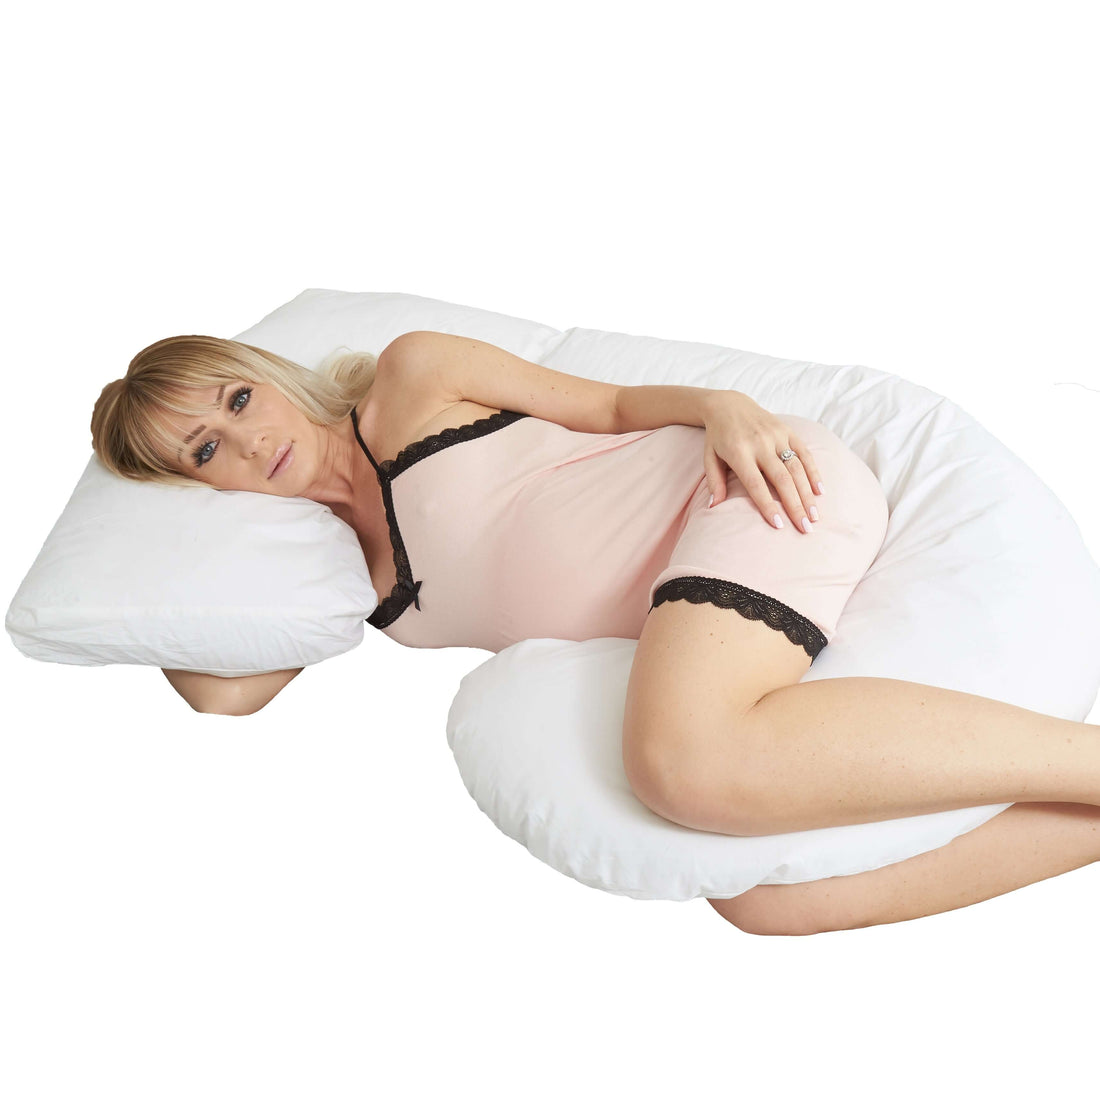 Back Pain and Discomfort | The Role of Body Pillows